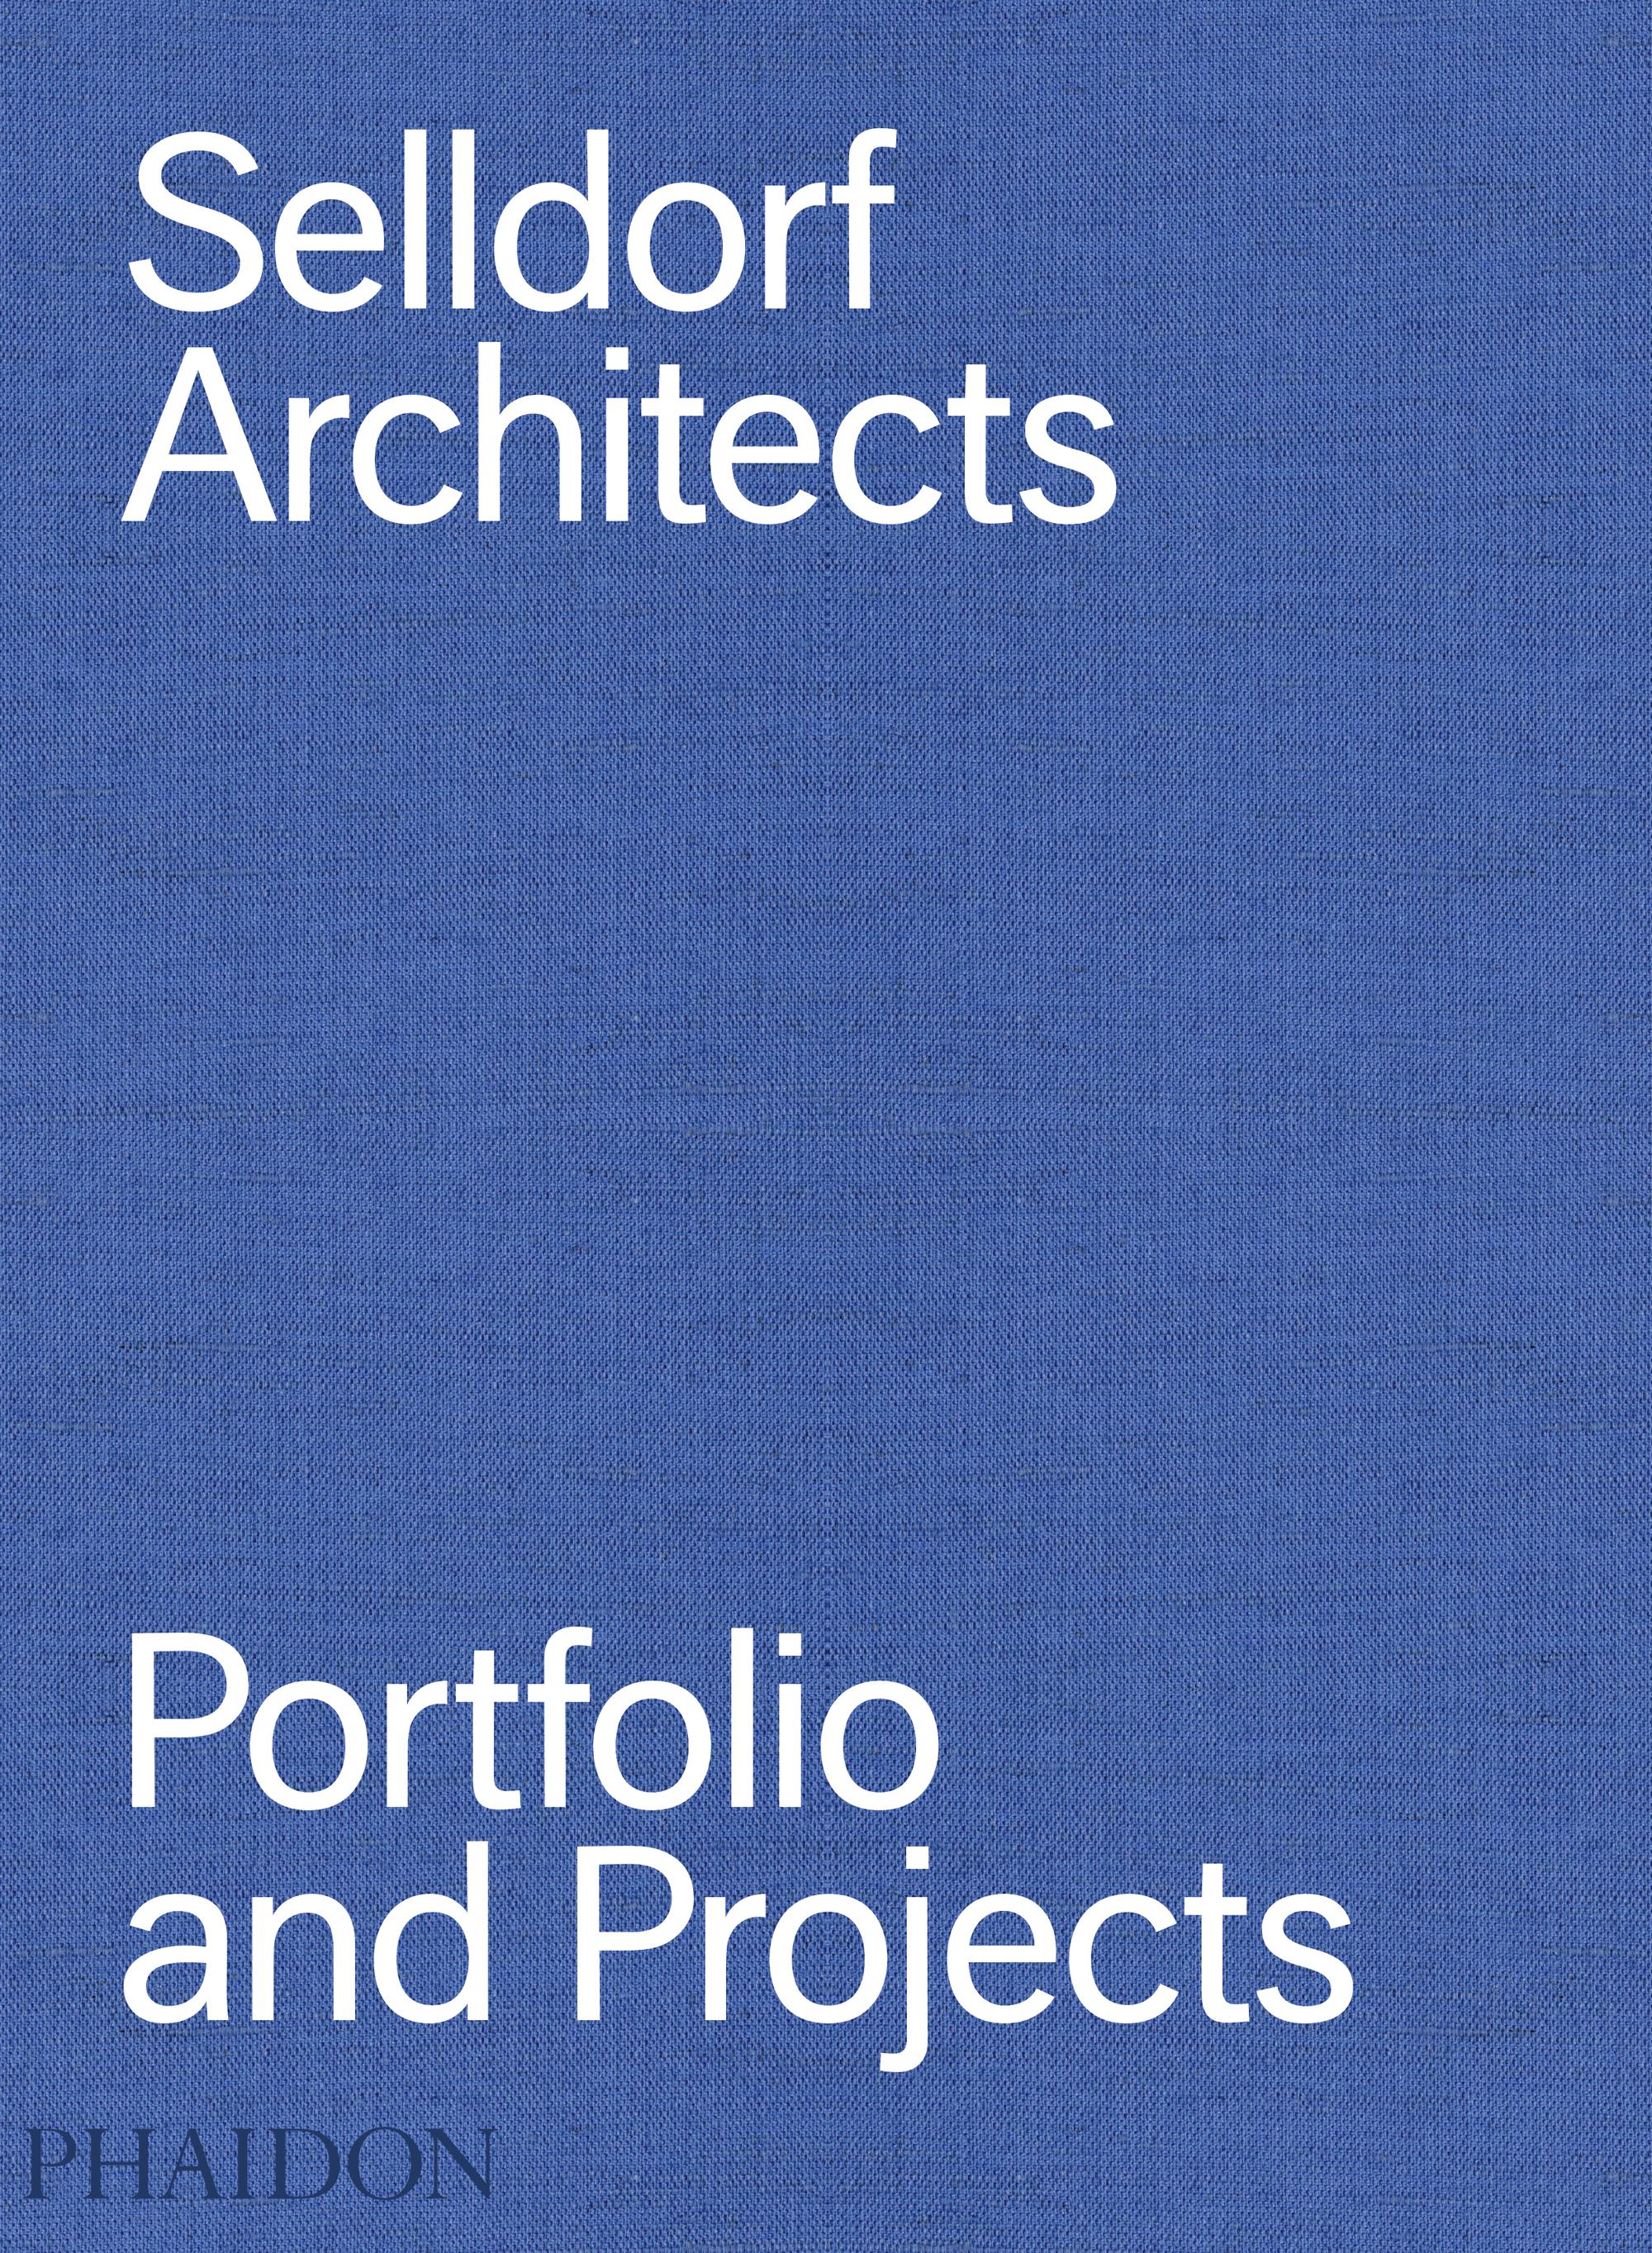 Paper Selldorf Architects Portfolio and Projects Book For Sale